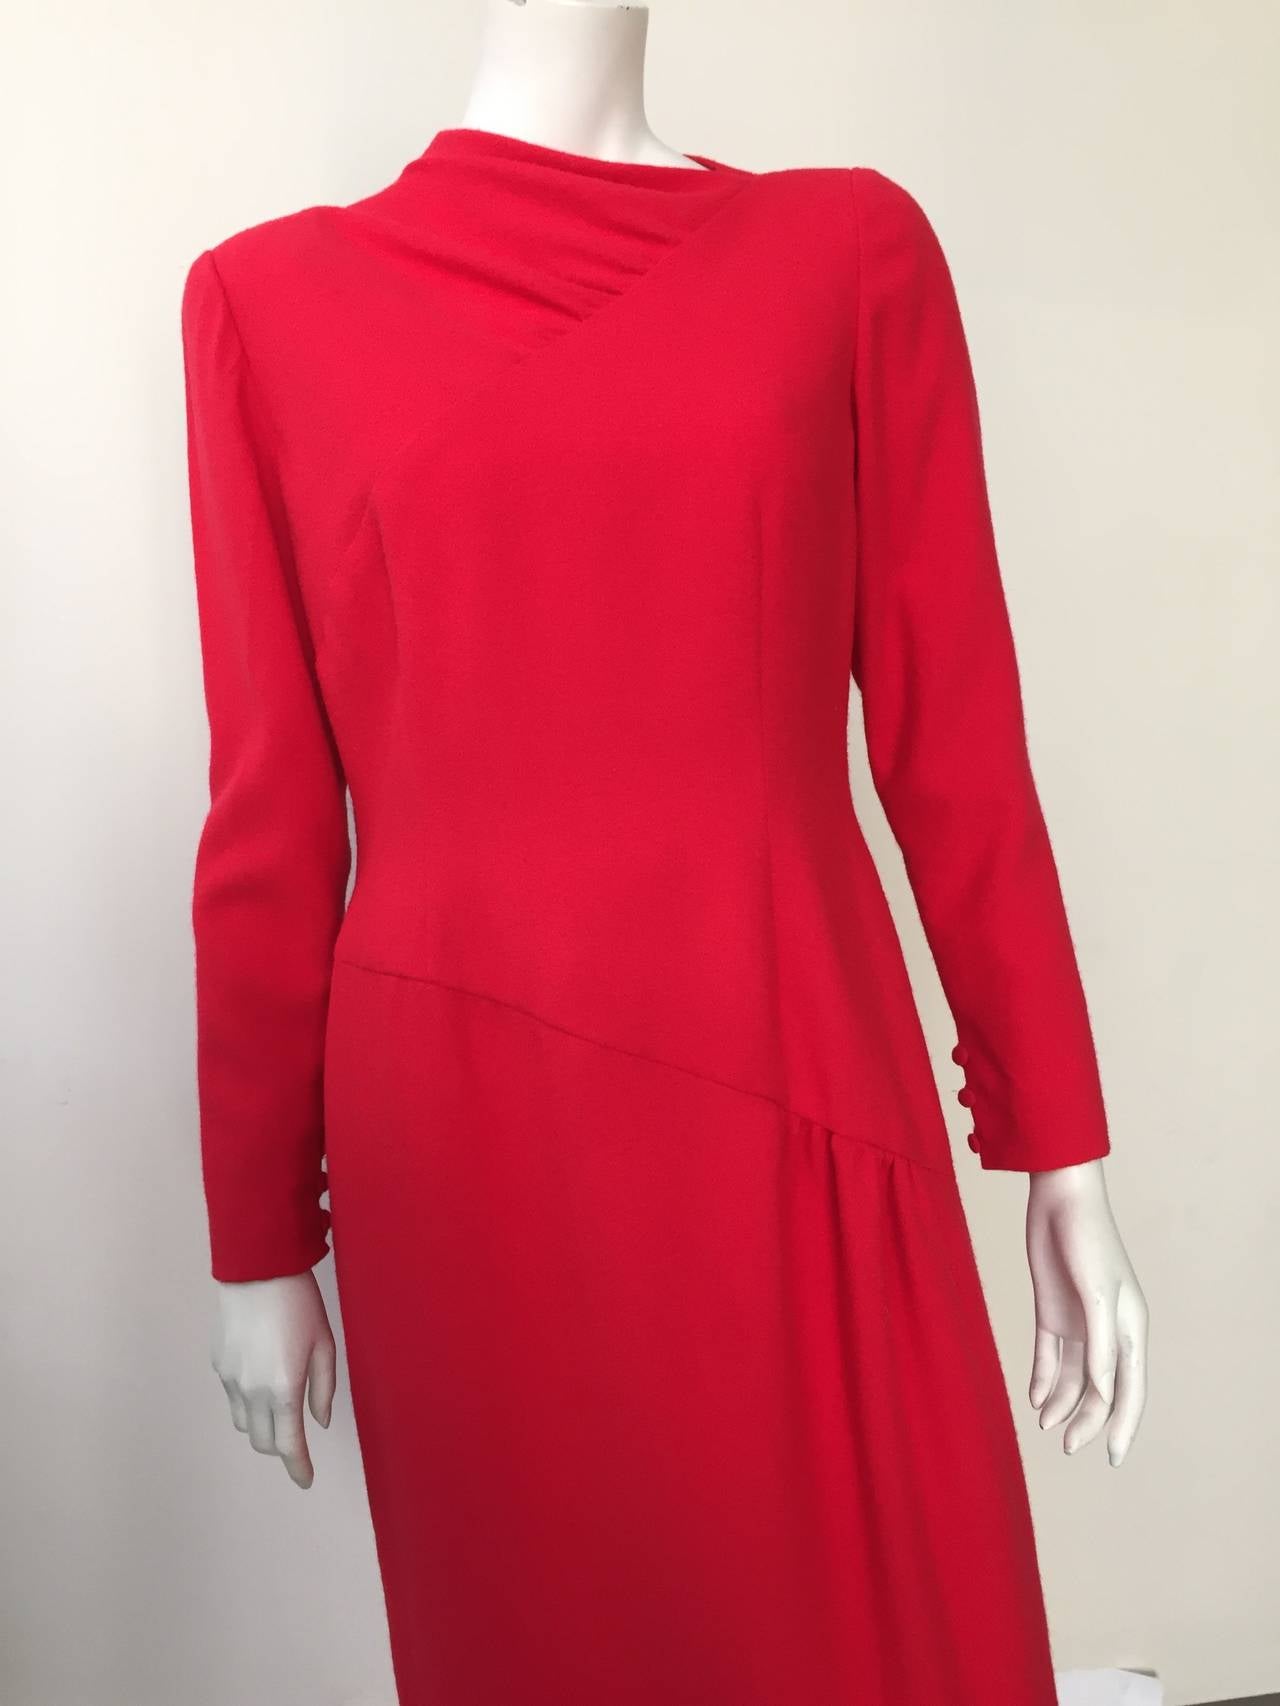 Bill Blass for Neiman Marcus 70s red wool dress asymmetrical cut at neckline & waist is a size 12.  Ladies please use your measuring tape to properly measure your lovely body to make certain this will fit you to perfection.
Dress is lined. 
There